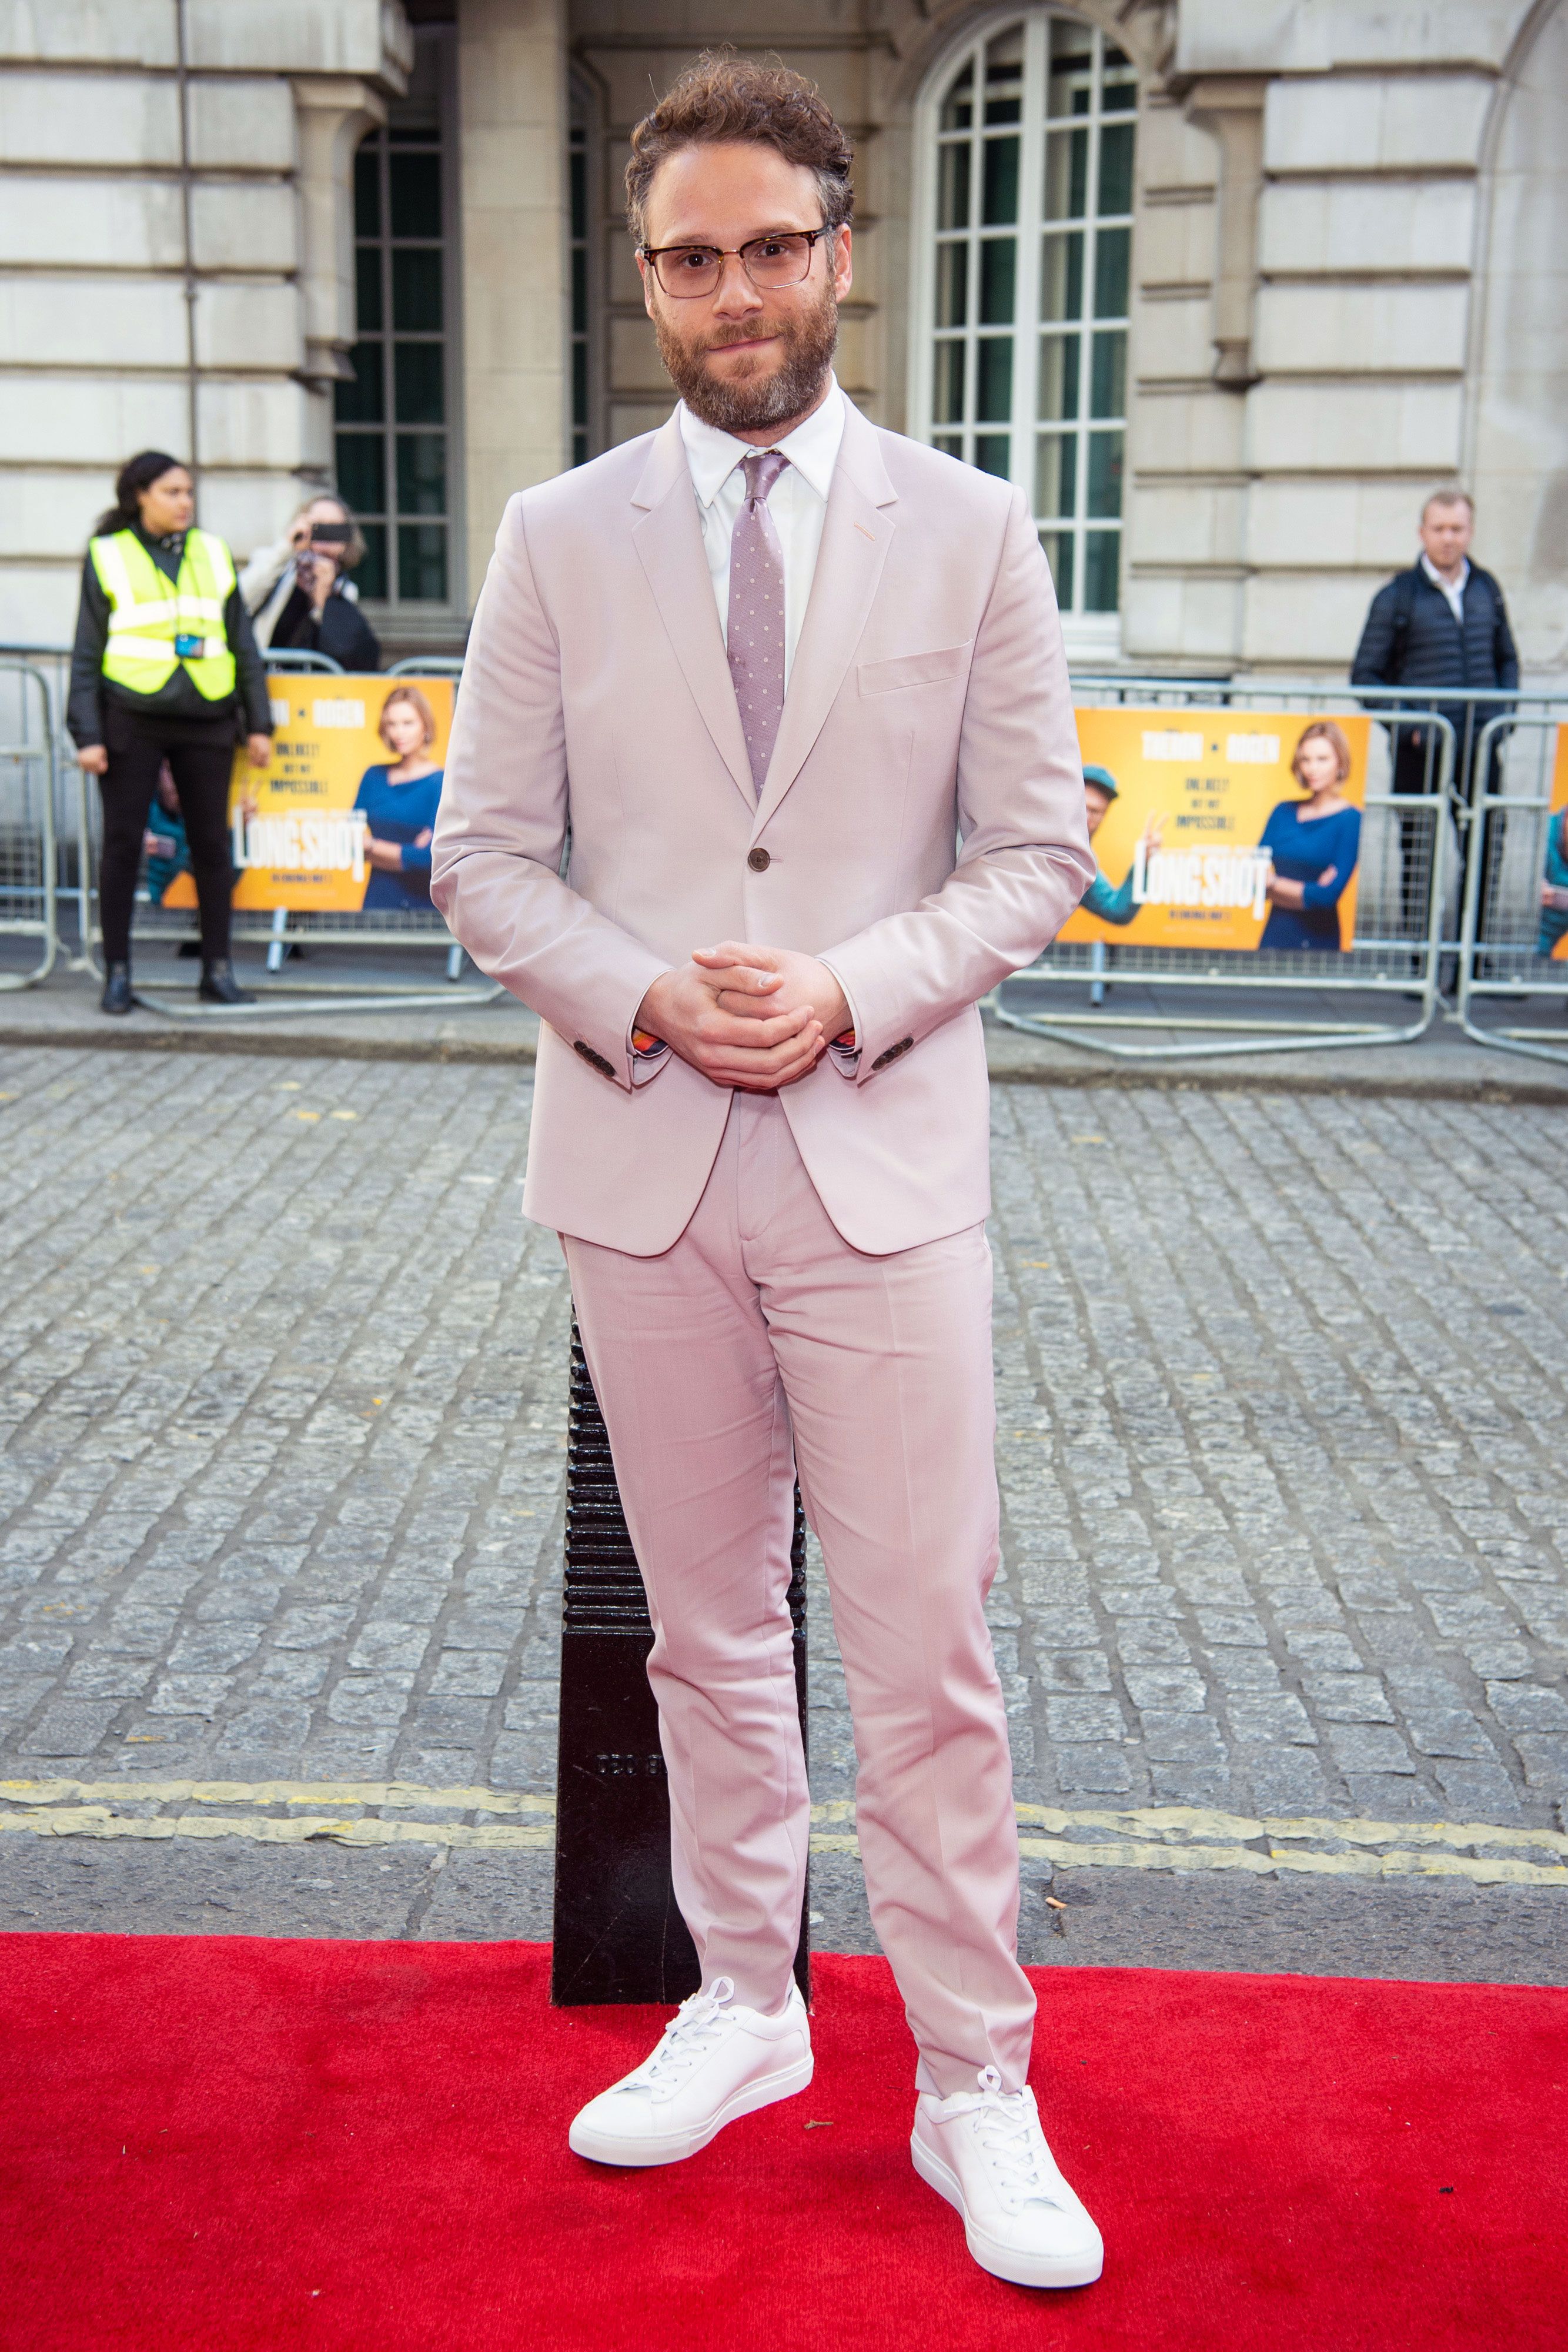 Seth Rogen Looks Great In The Pink Suit Trend While Promoting Long